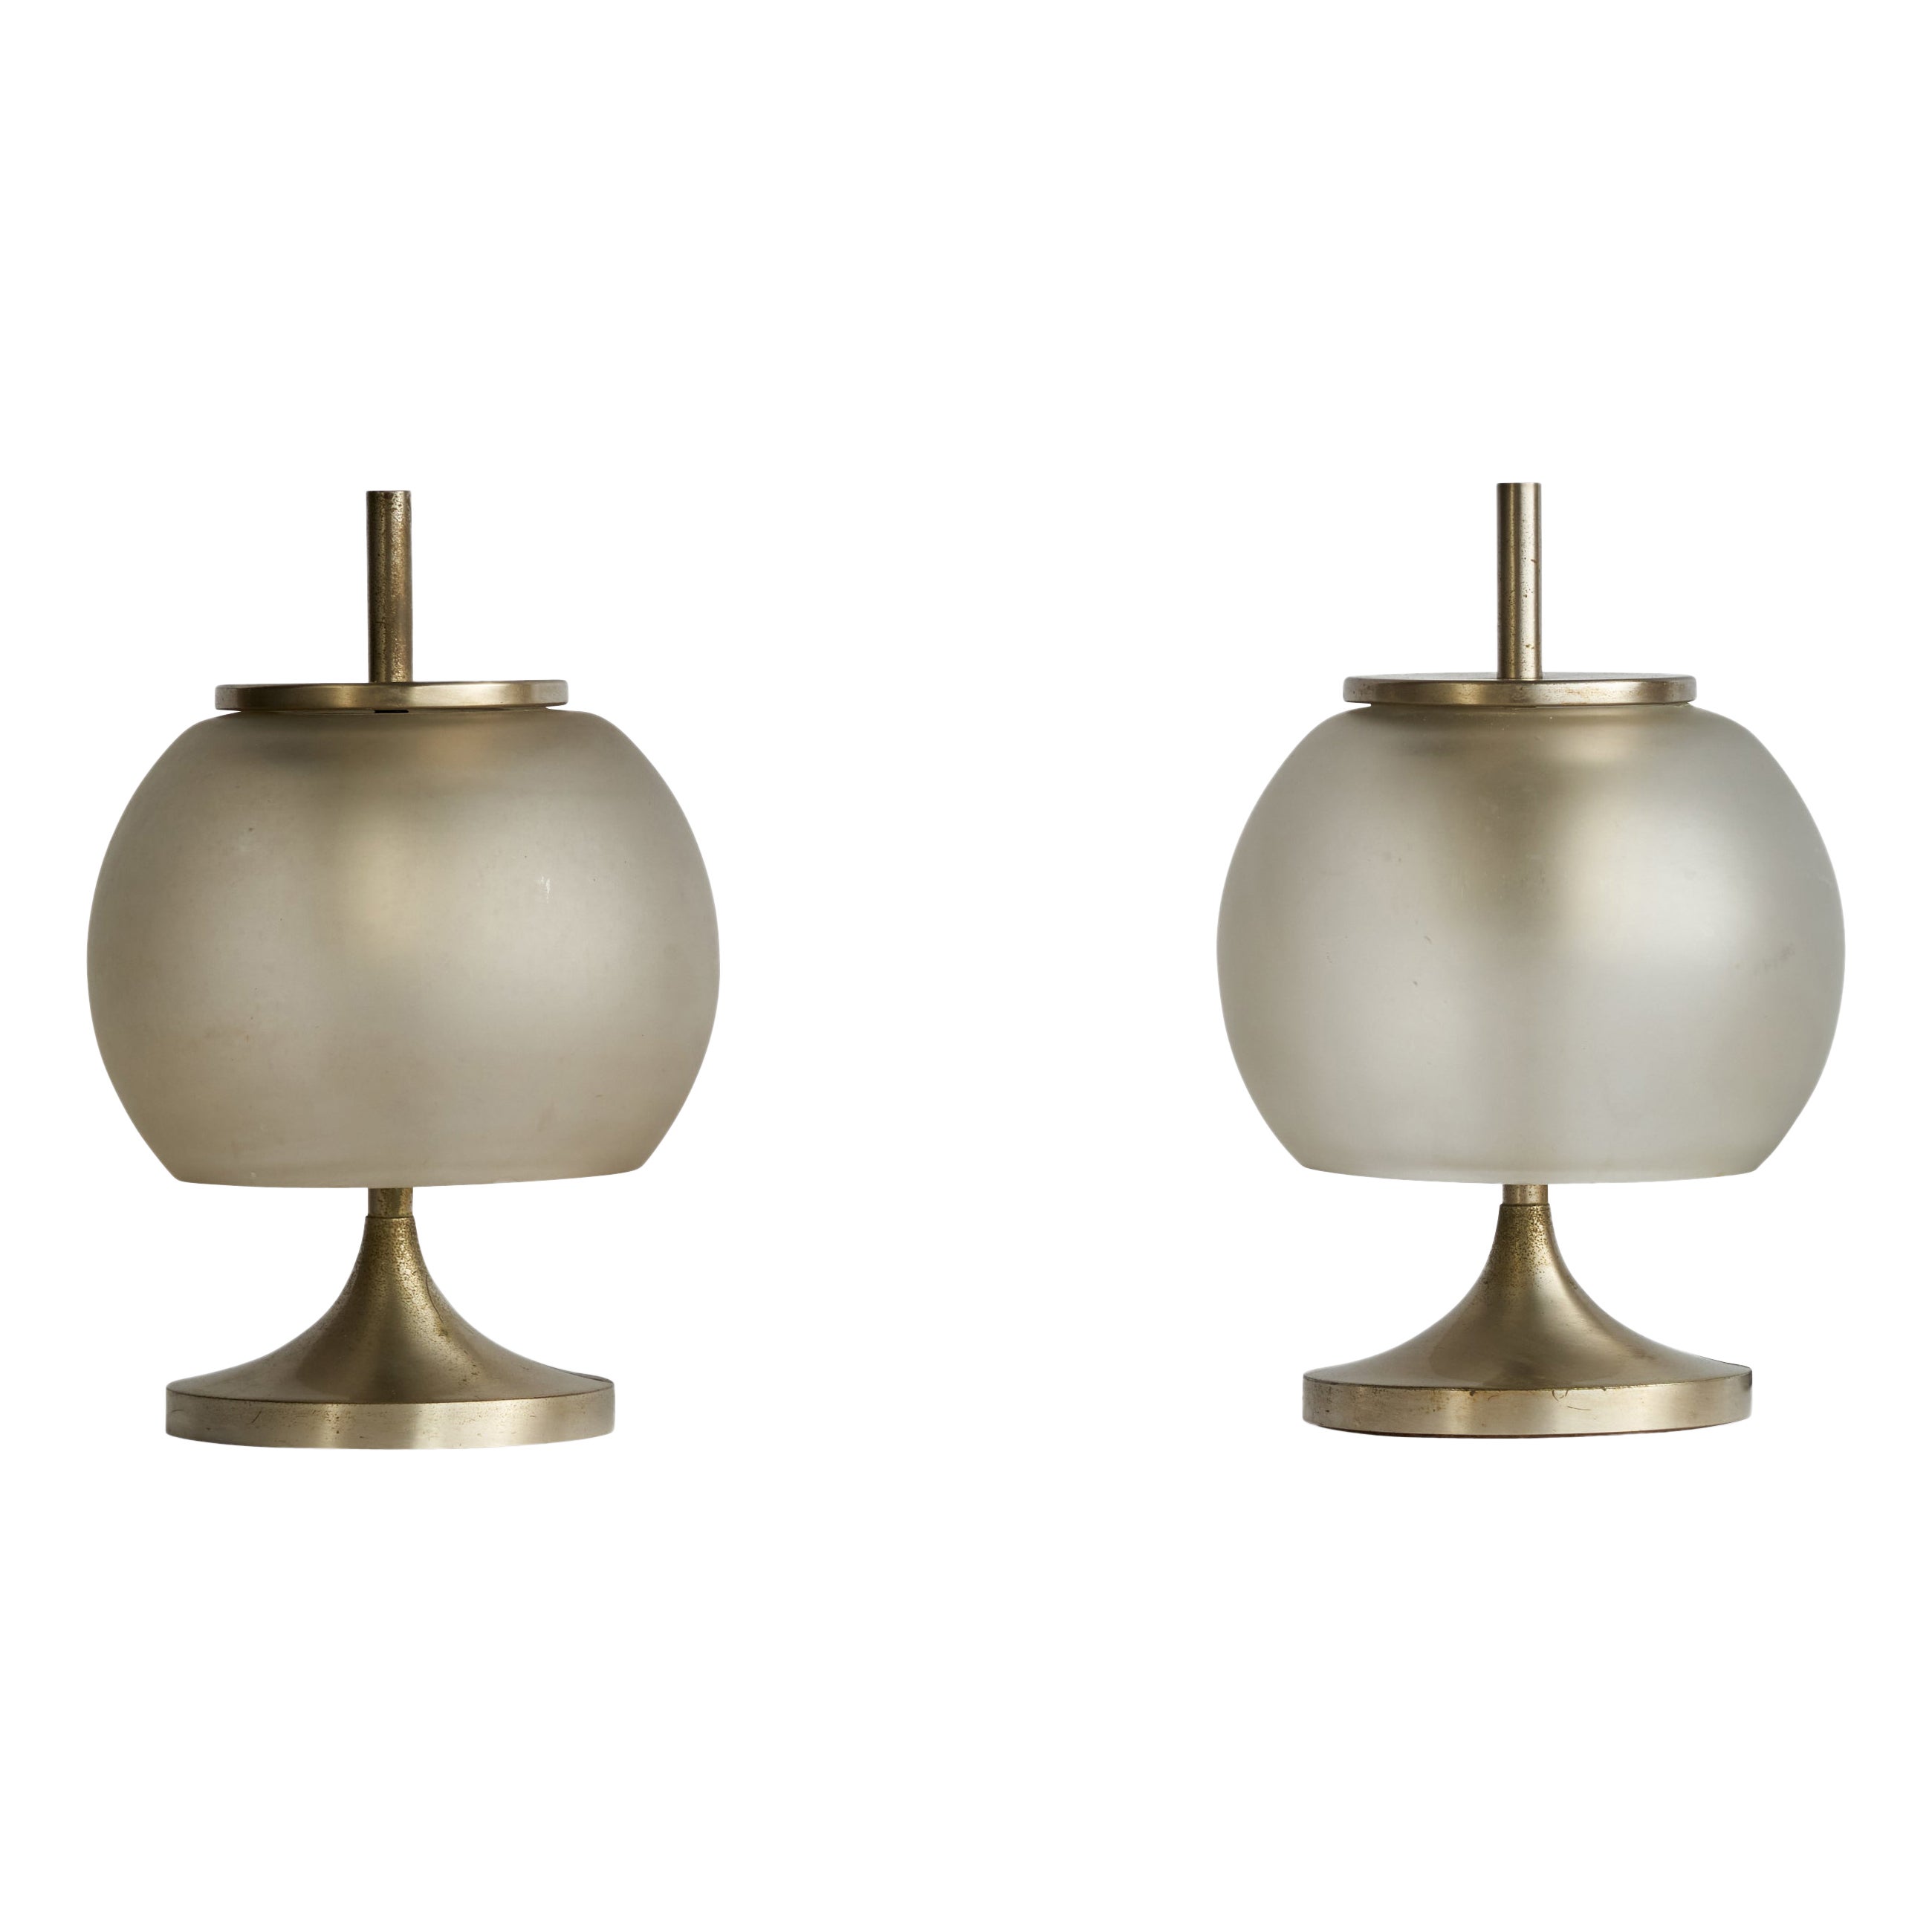 Emma Gismondi, Table Lamps, Nickel-plated brass, Glass, Italy, 1960s For Sale